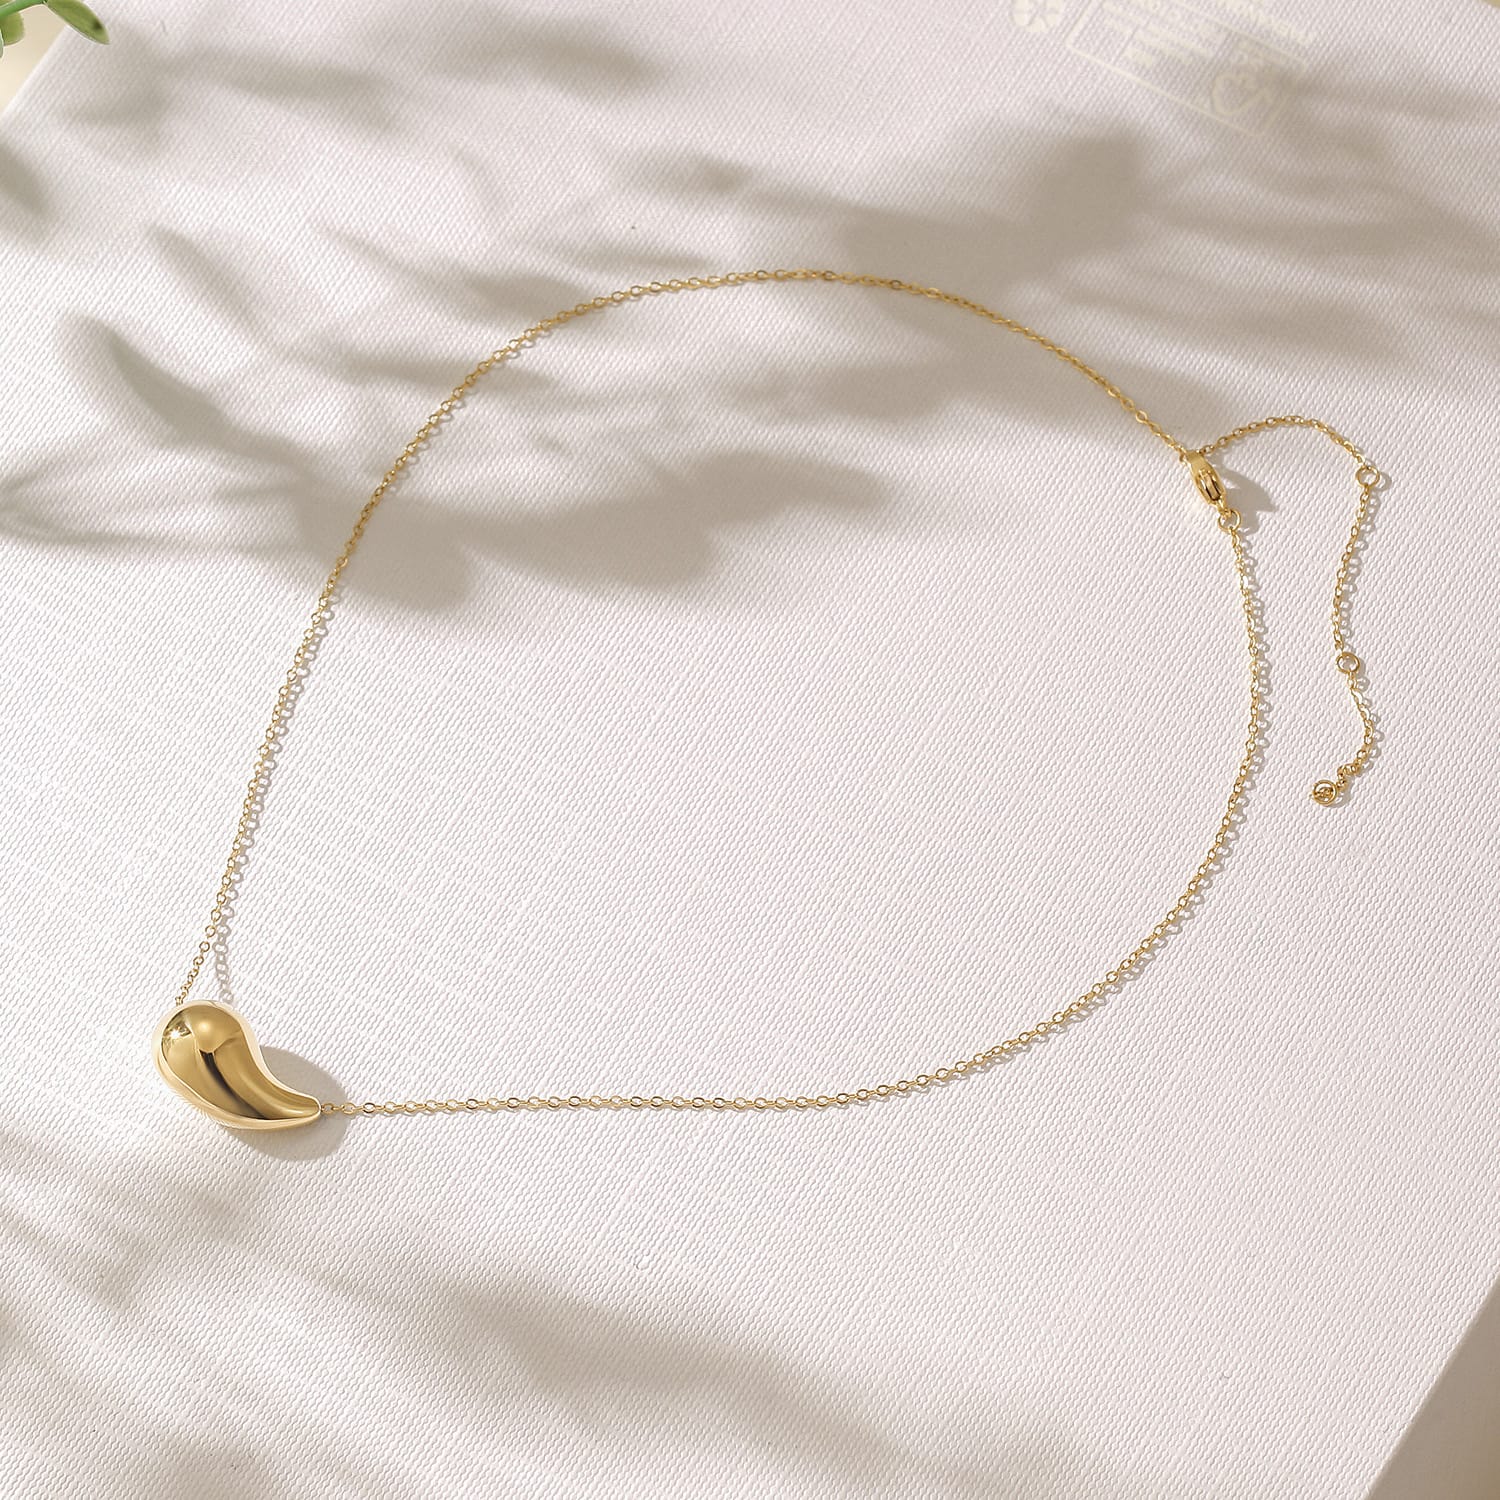 Gold stainless steel drop necklace